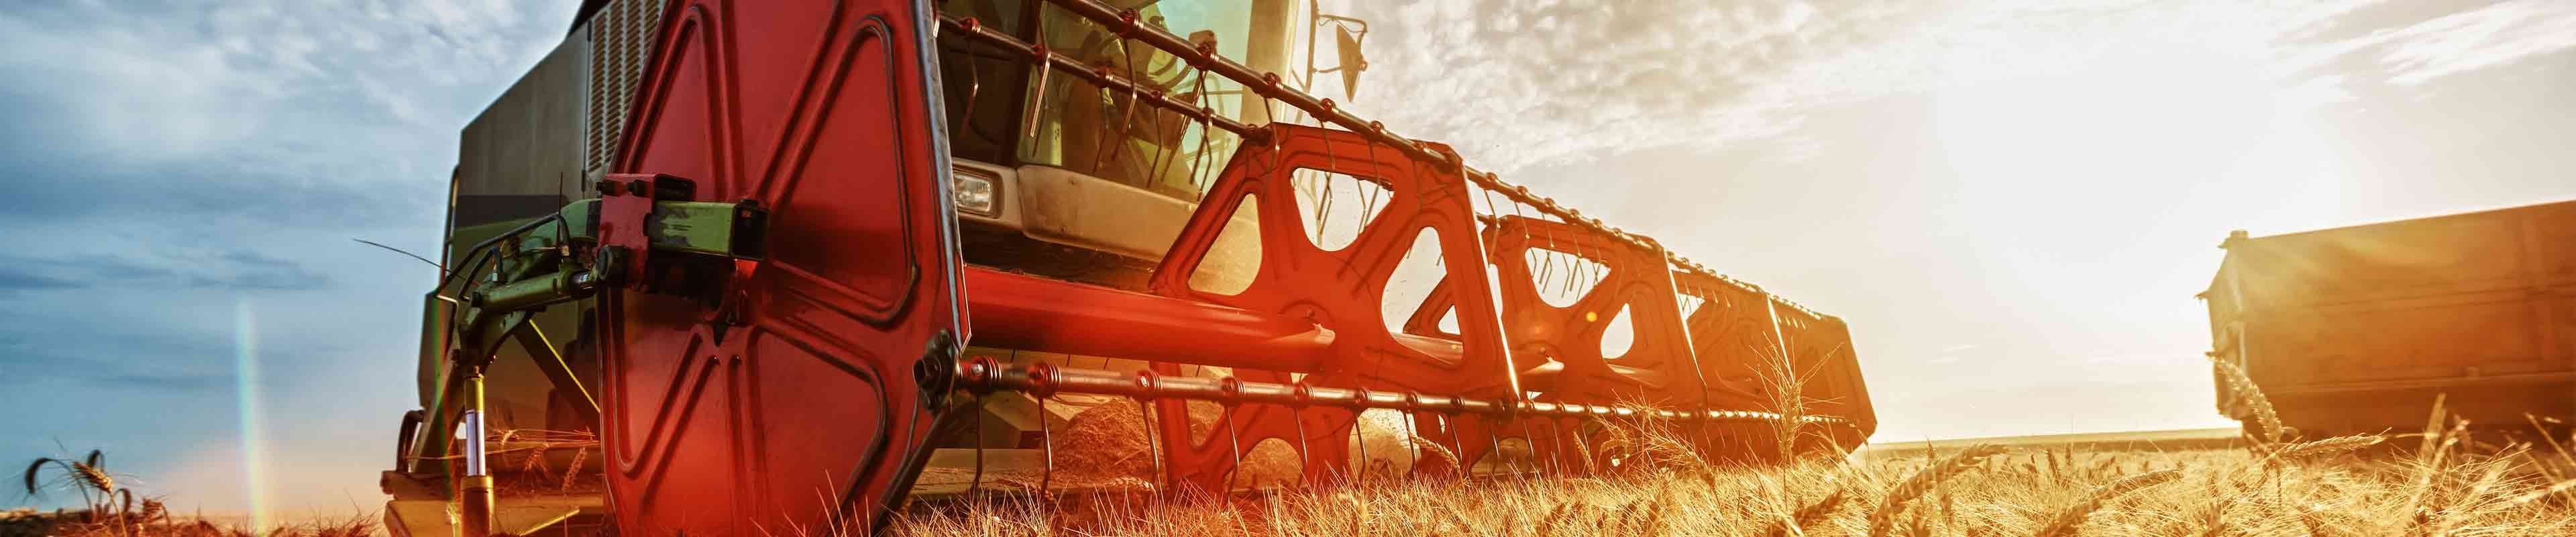 Close up image of a wheat harvest equipment-Web